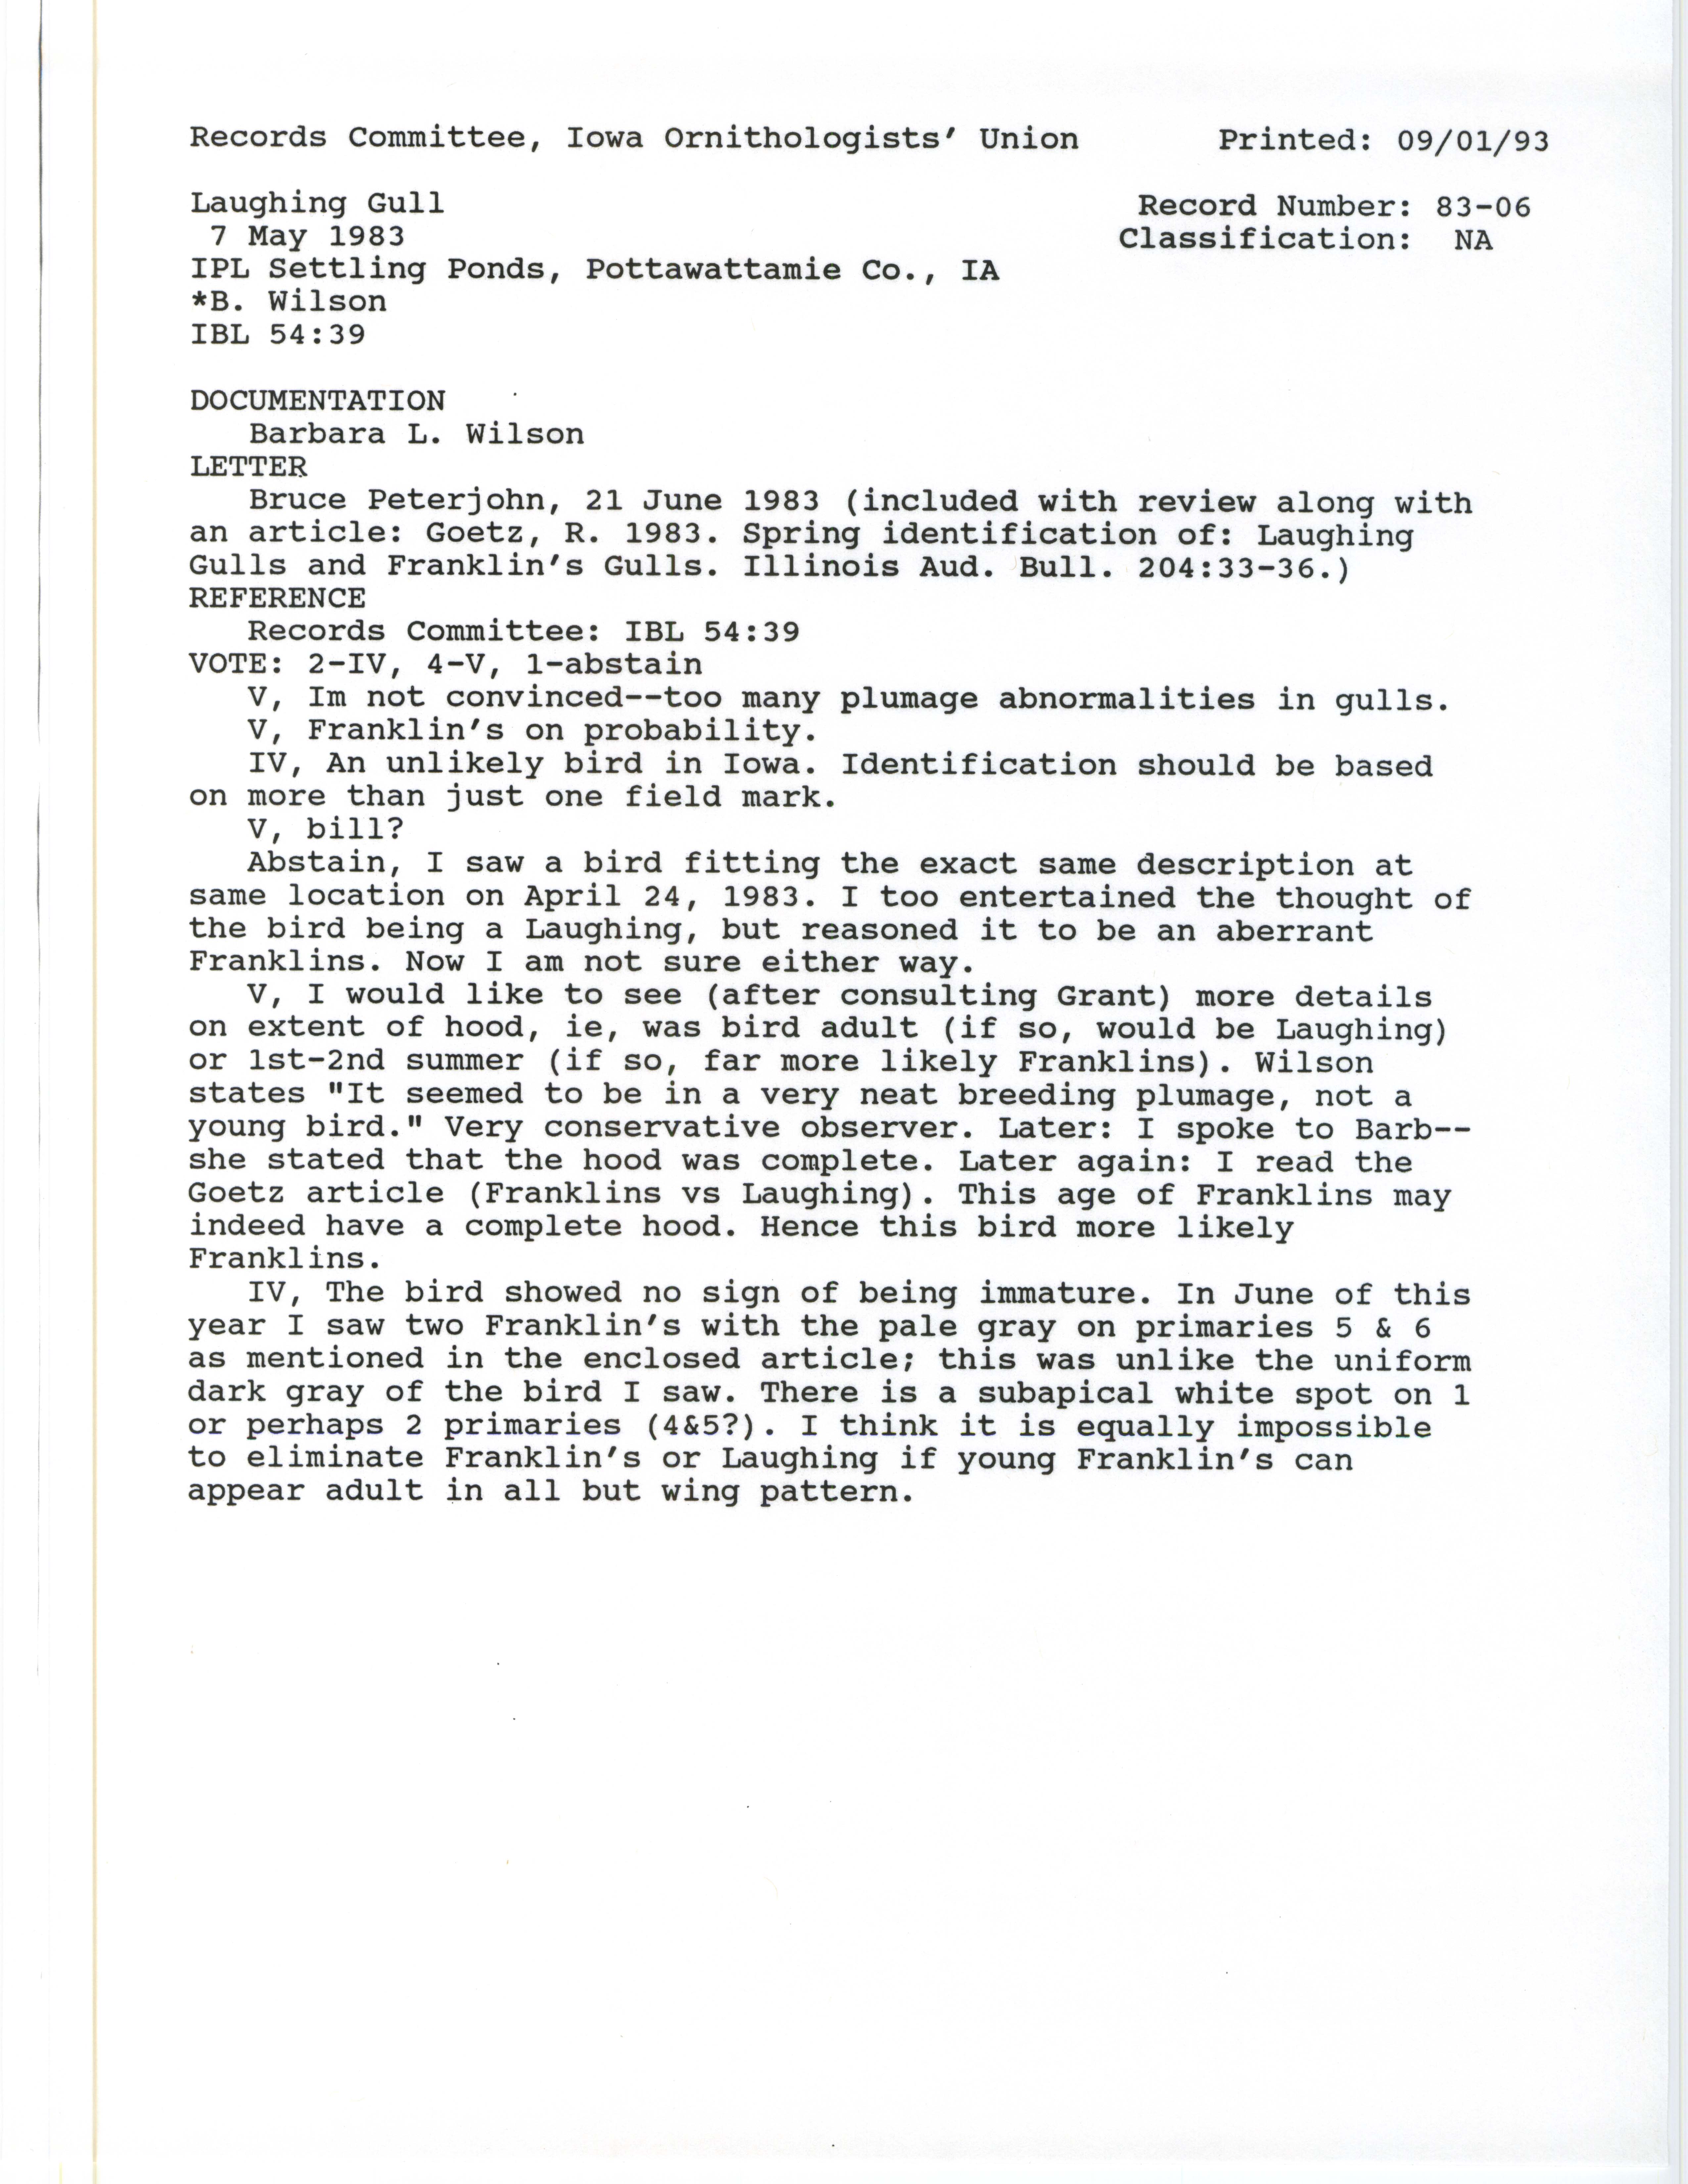 Records Committee review for rare bird sighting of Laughing Gull at IPL Ponds, 1983